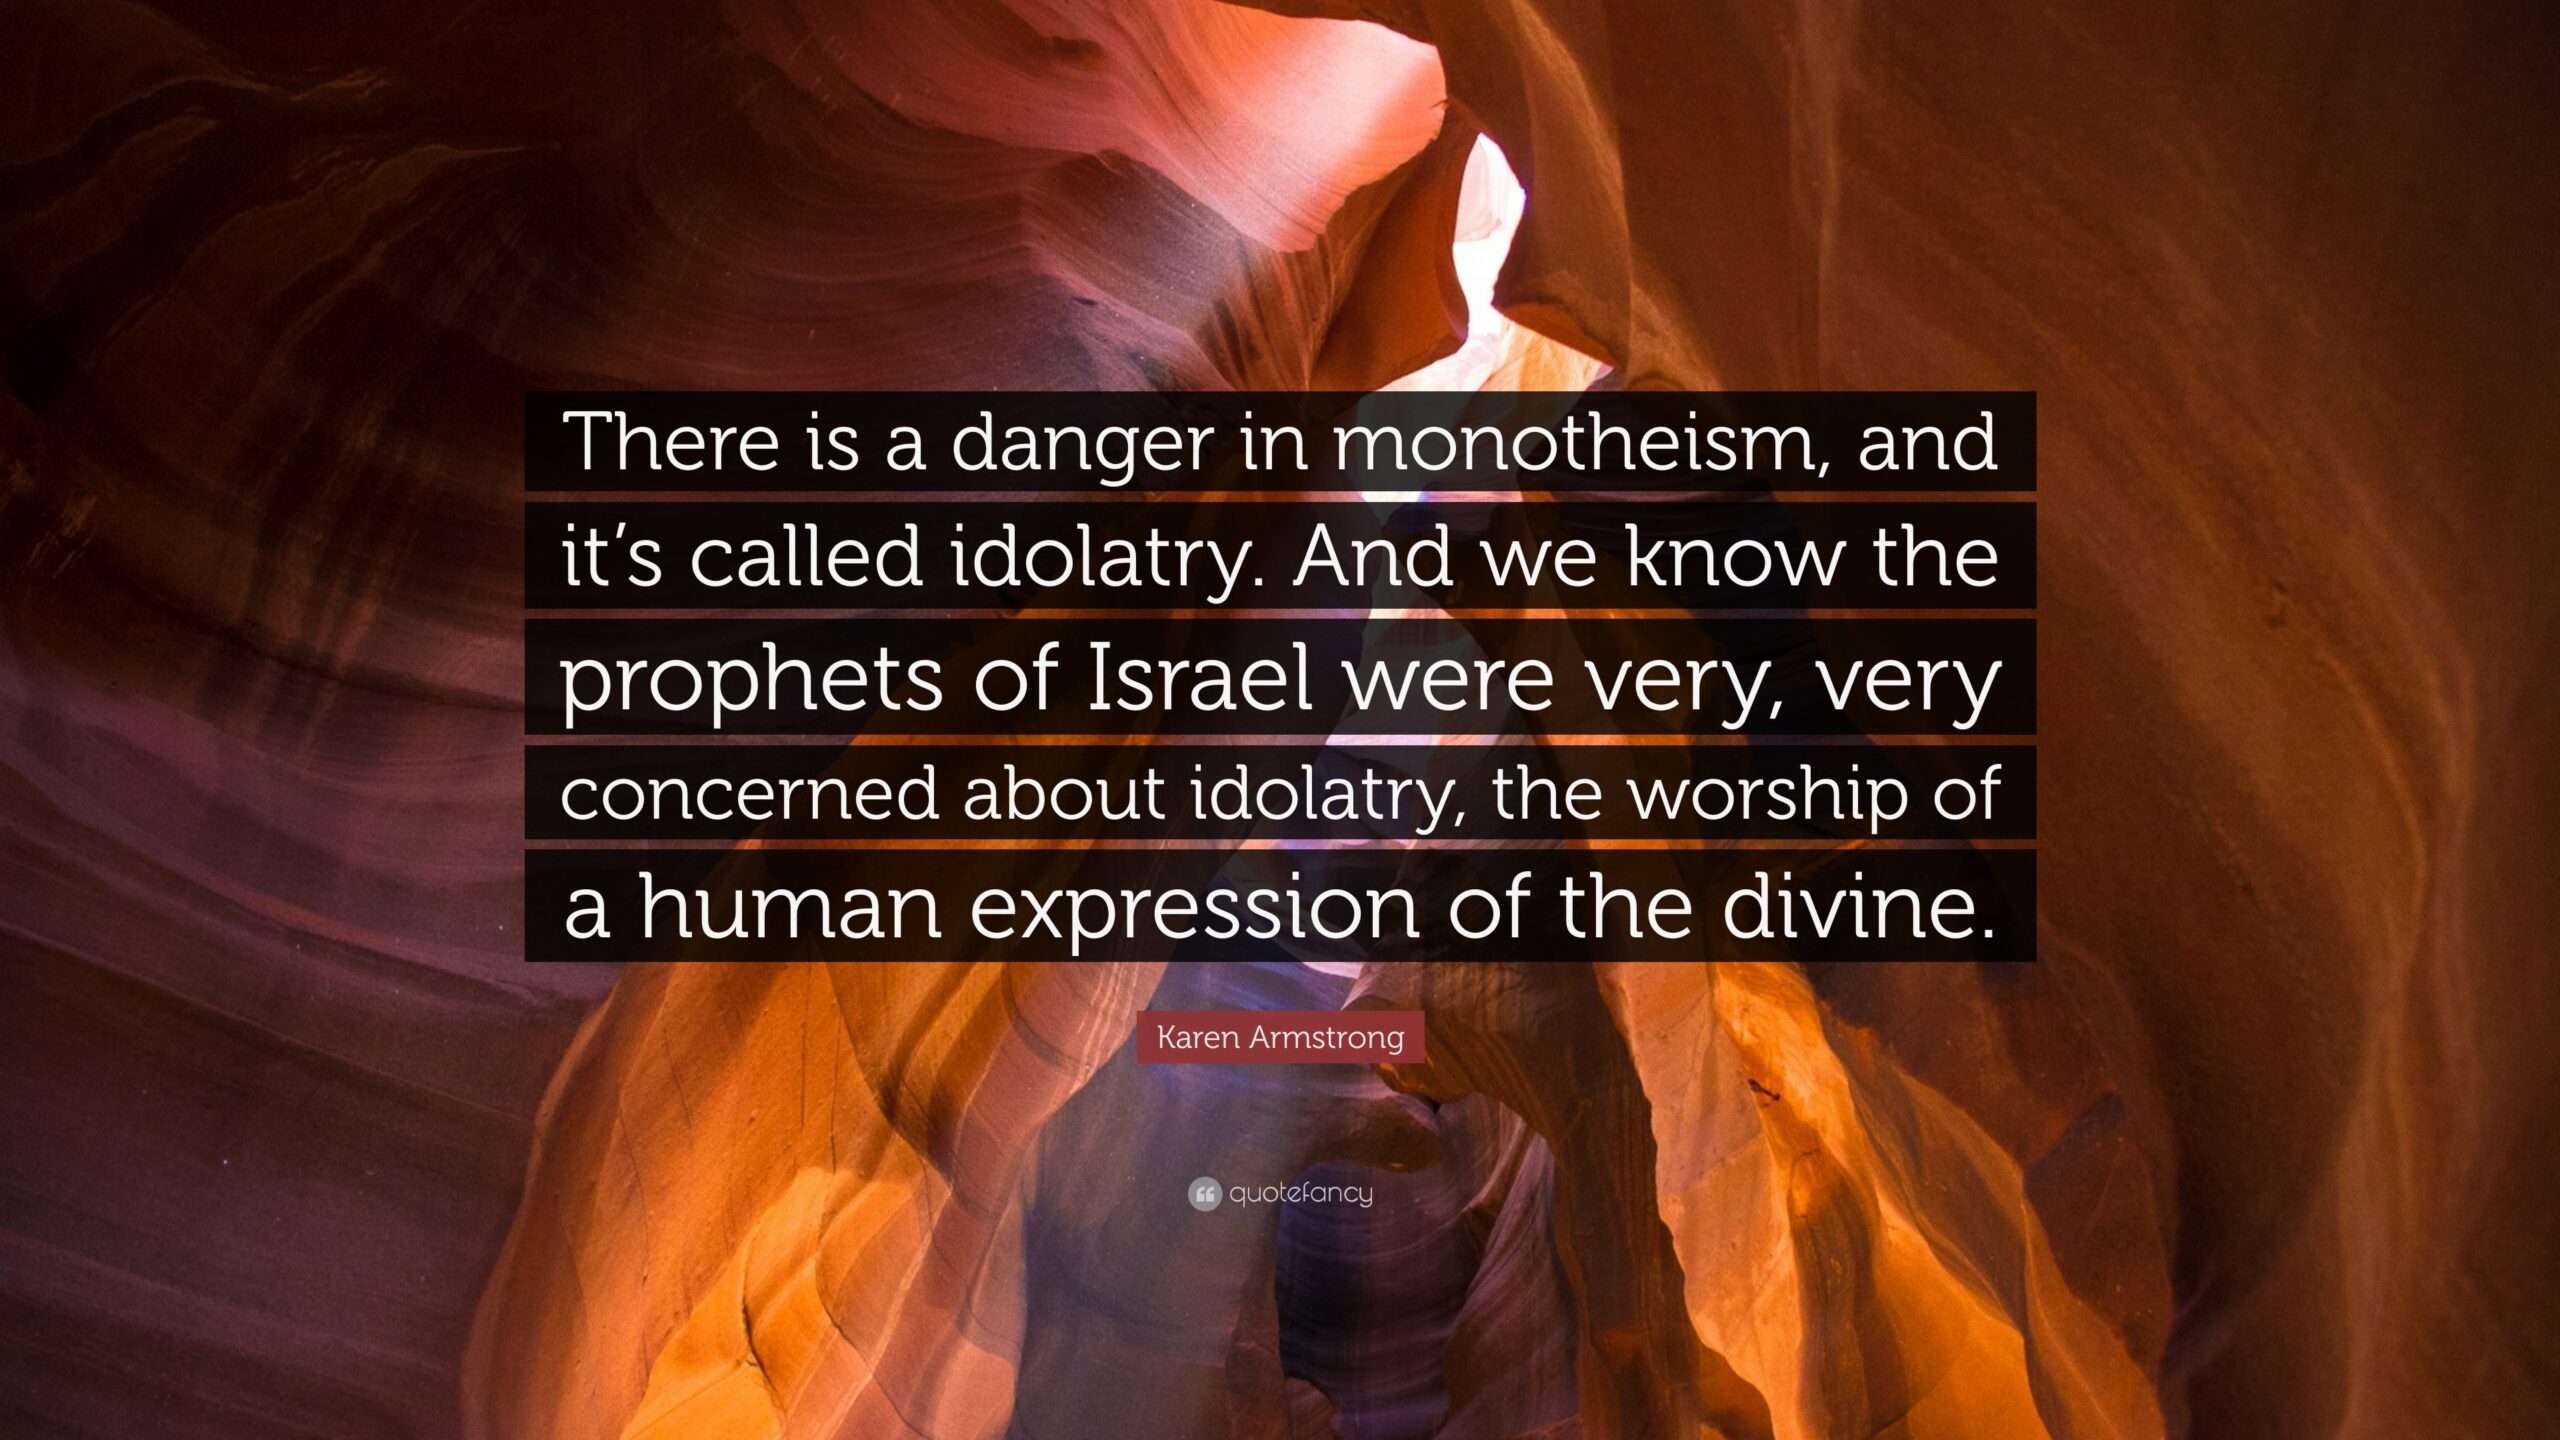 Karen Armstrong Quote: “There is a danger in monotheism, and it’s